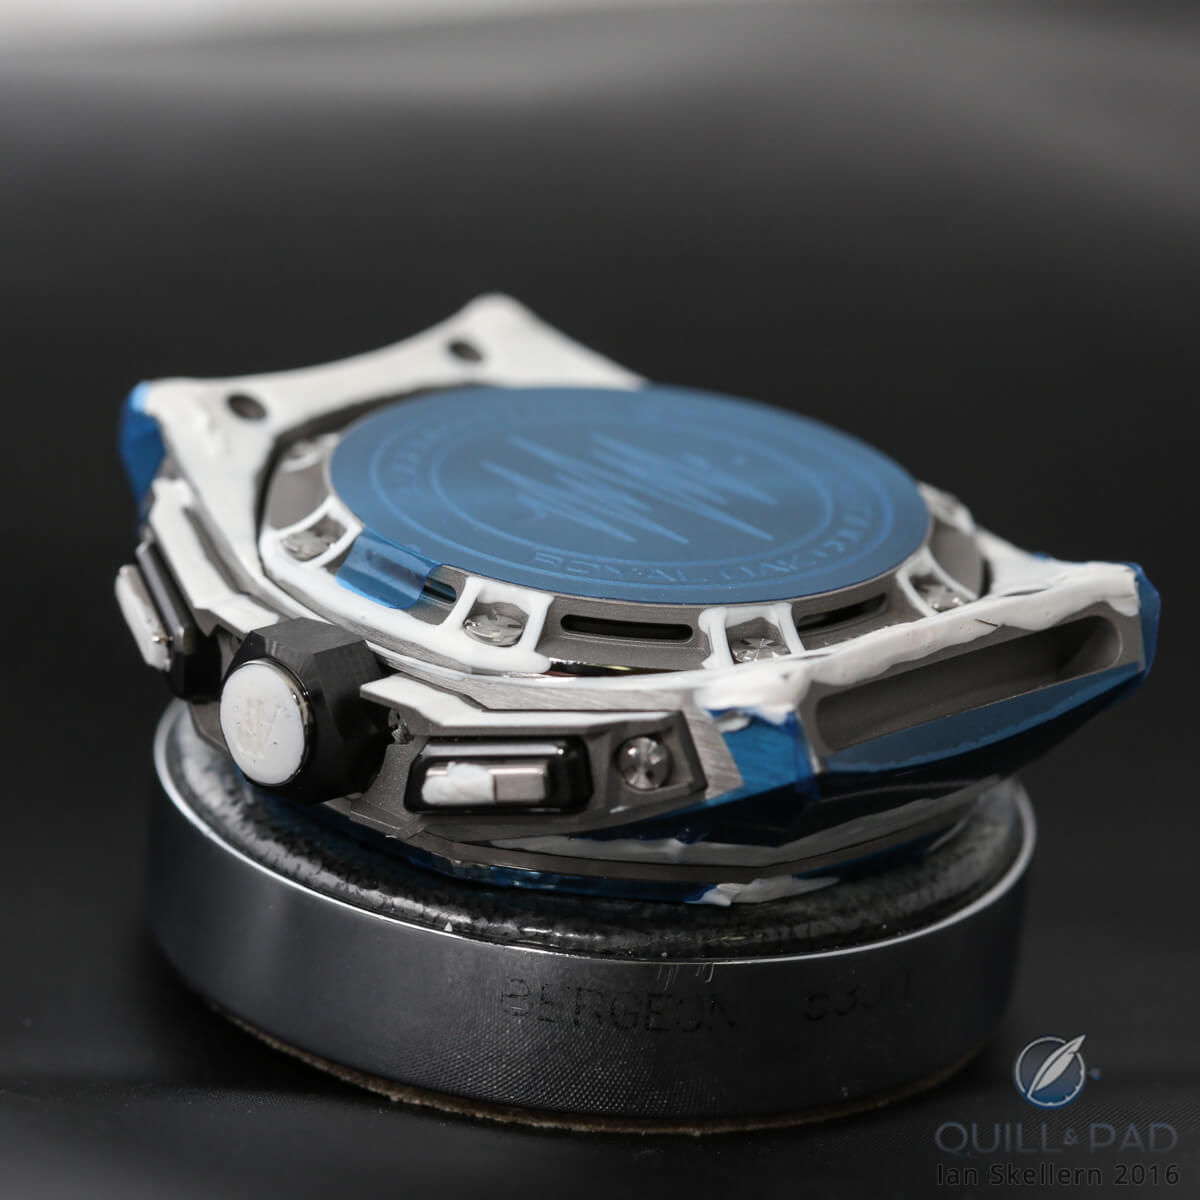 You can see the slots around the edge of the caseback that allow the sound to escape easily and in a focused direction (towards the ear), Audemars Piguet Royal Oak Concept Supersonnerie (blue is protective tape)